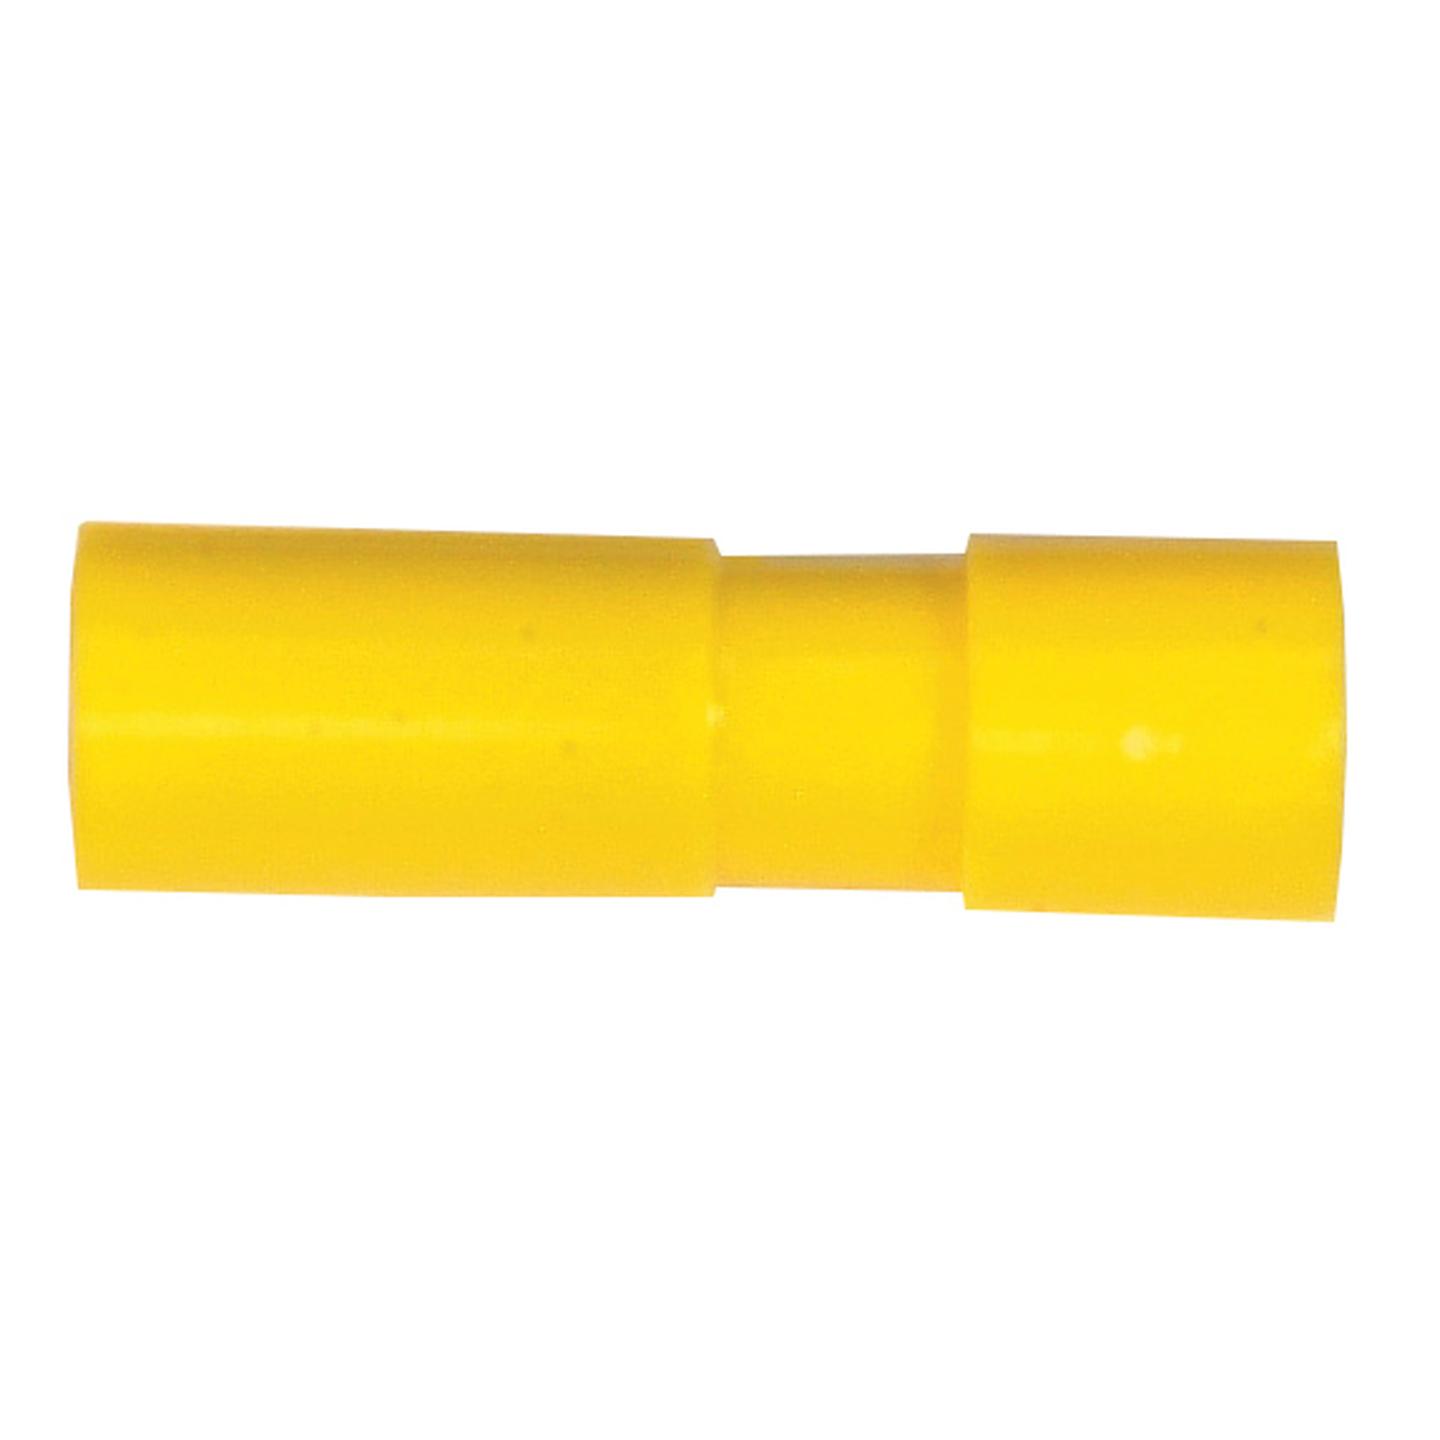 4mm Bullet Female - Yellow - Pack of 8